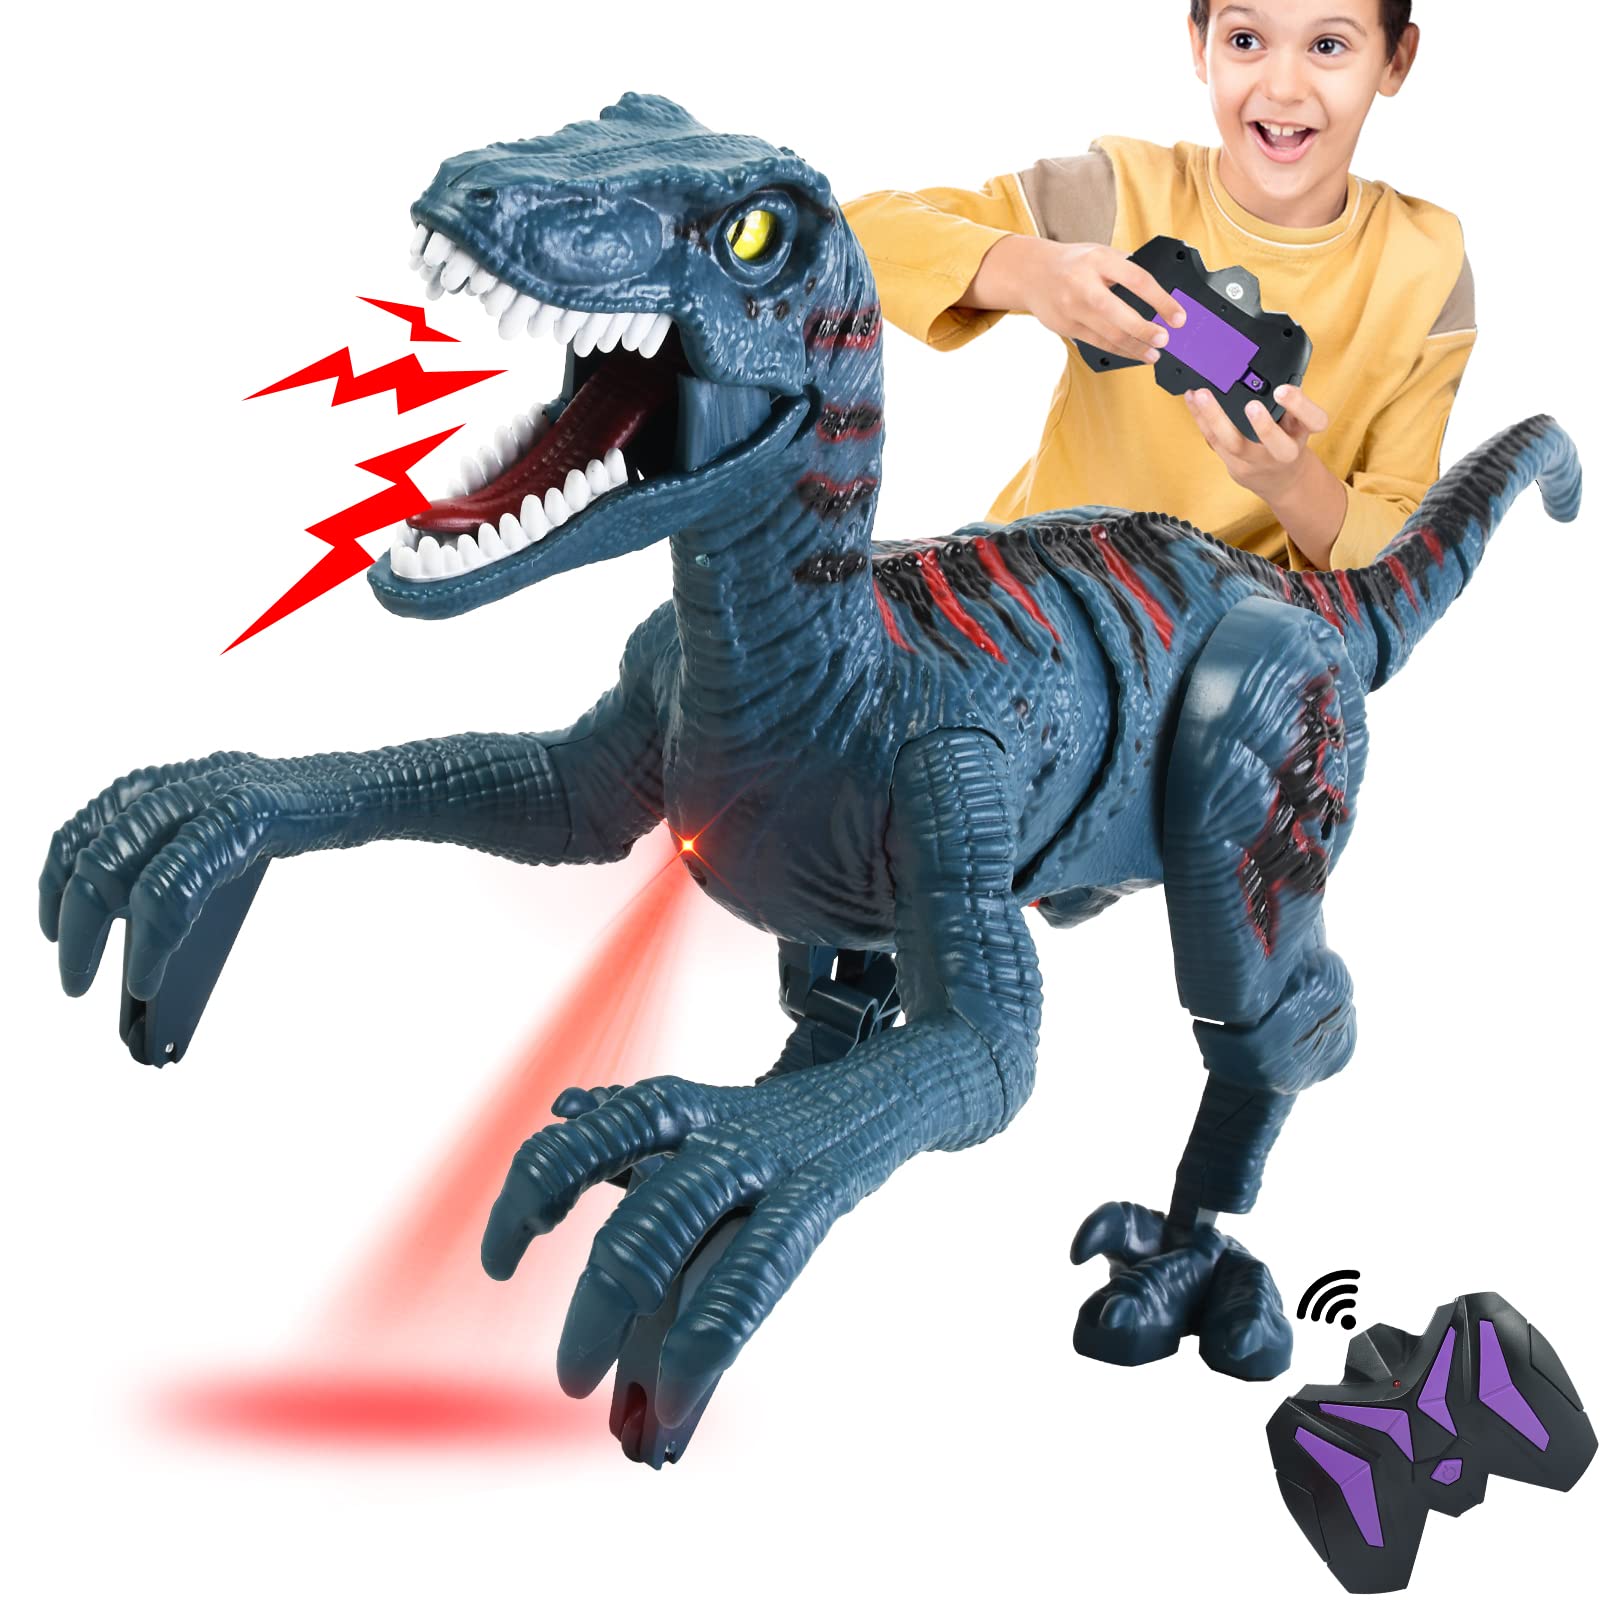 Remote Control Dinosaur Toys for Kids - Walking Robot Dinosaur Toy for Boys Age 5-7, RC Jurassic Velociraptor Toys 8-12, Robotic Blue Dino with Light Sounds, Birthday Dinosaur Gifts Toys 3+ Year Old